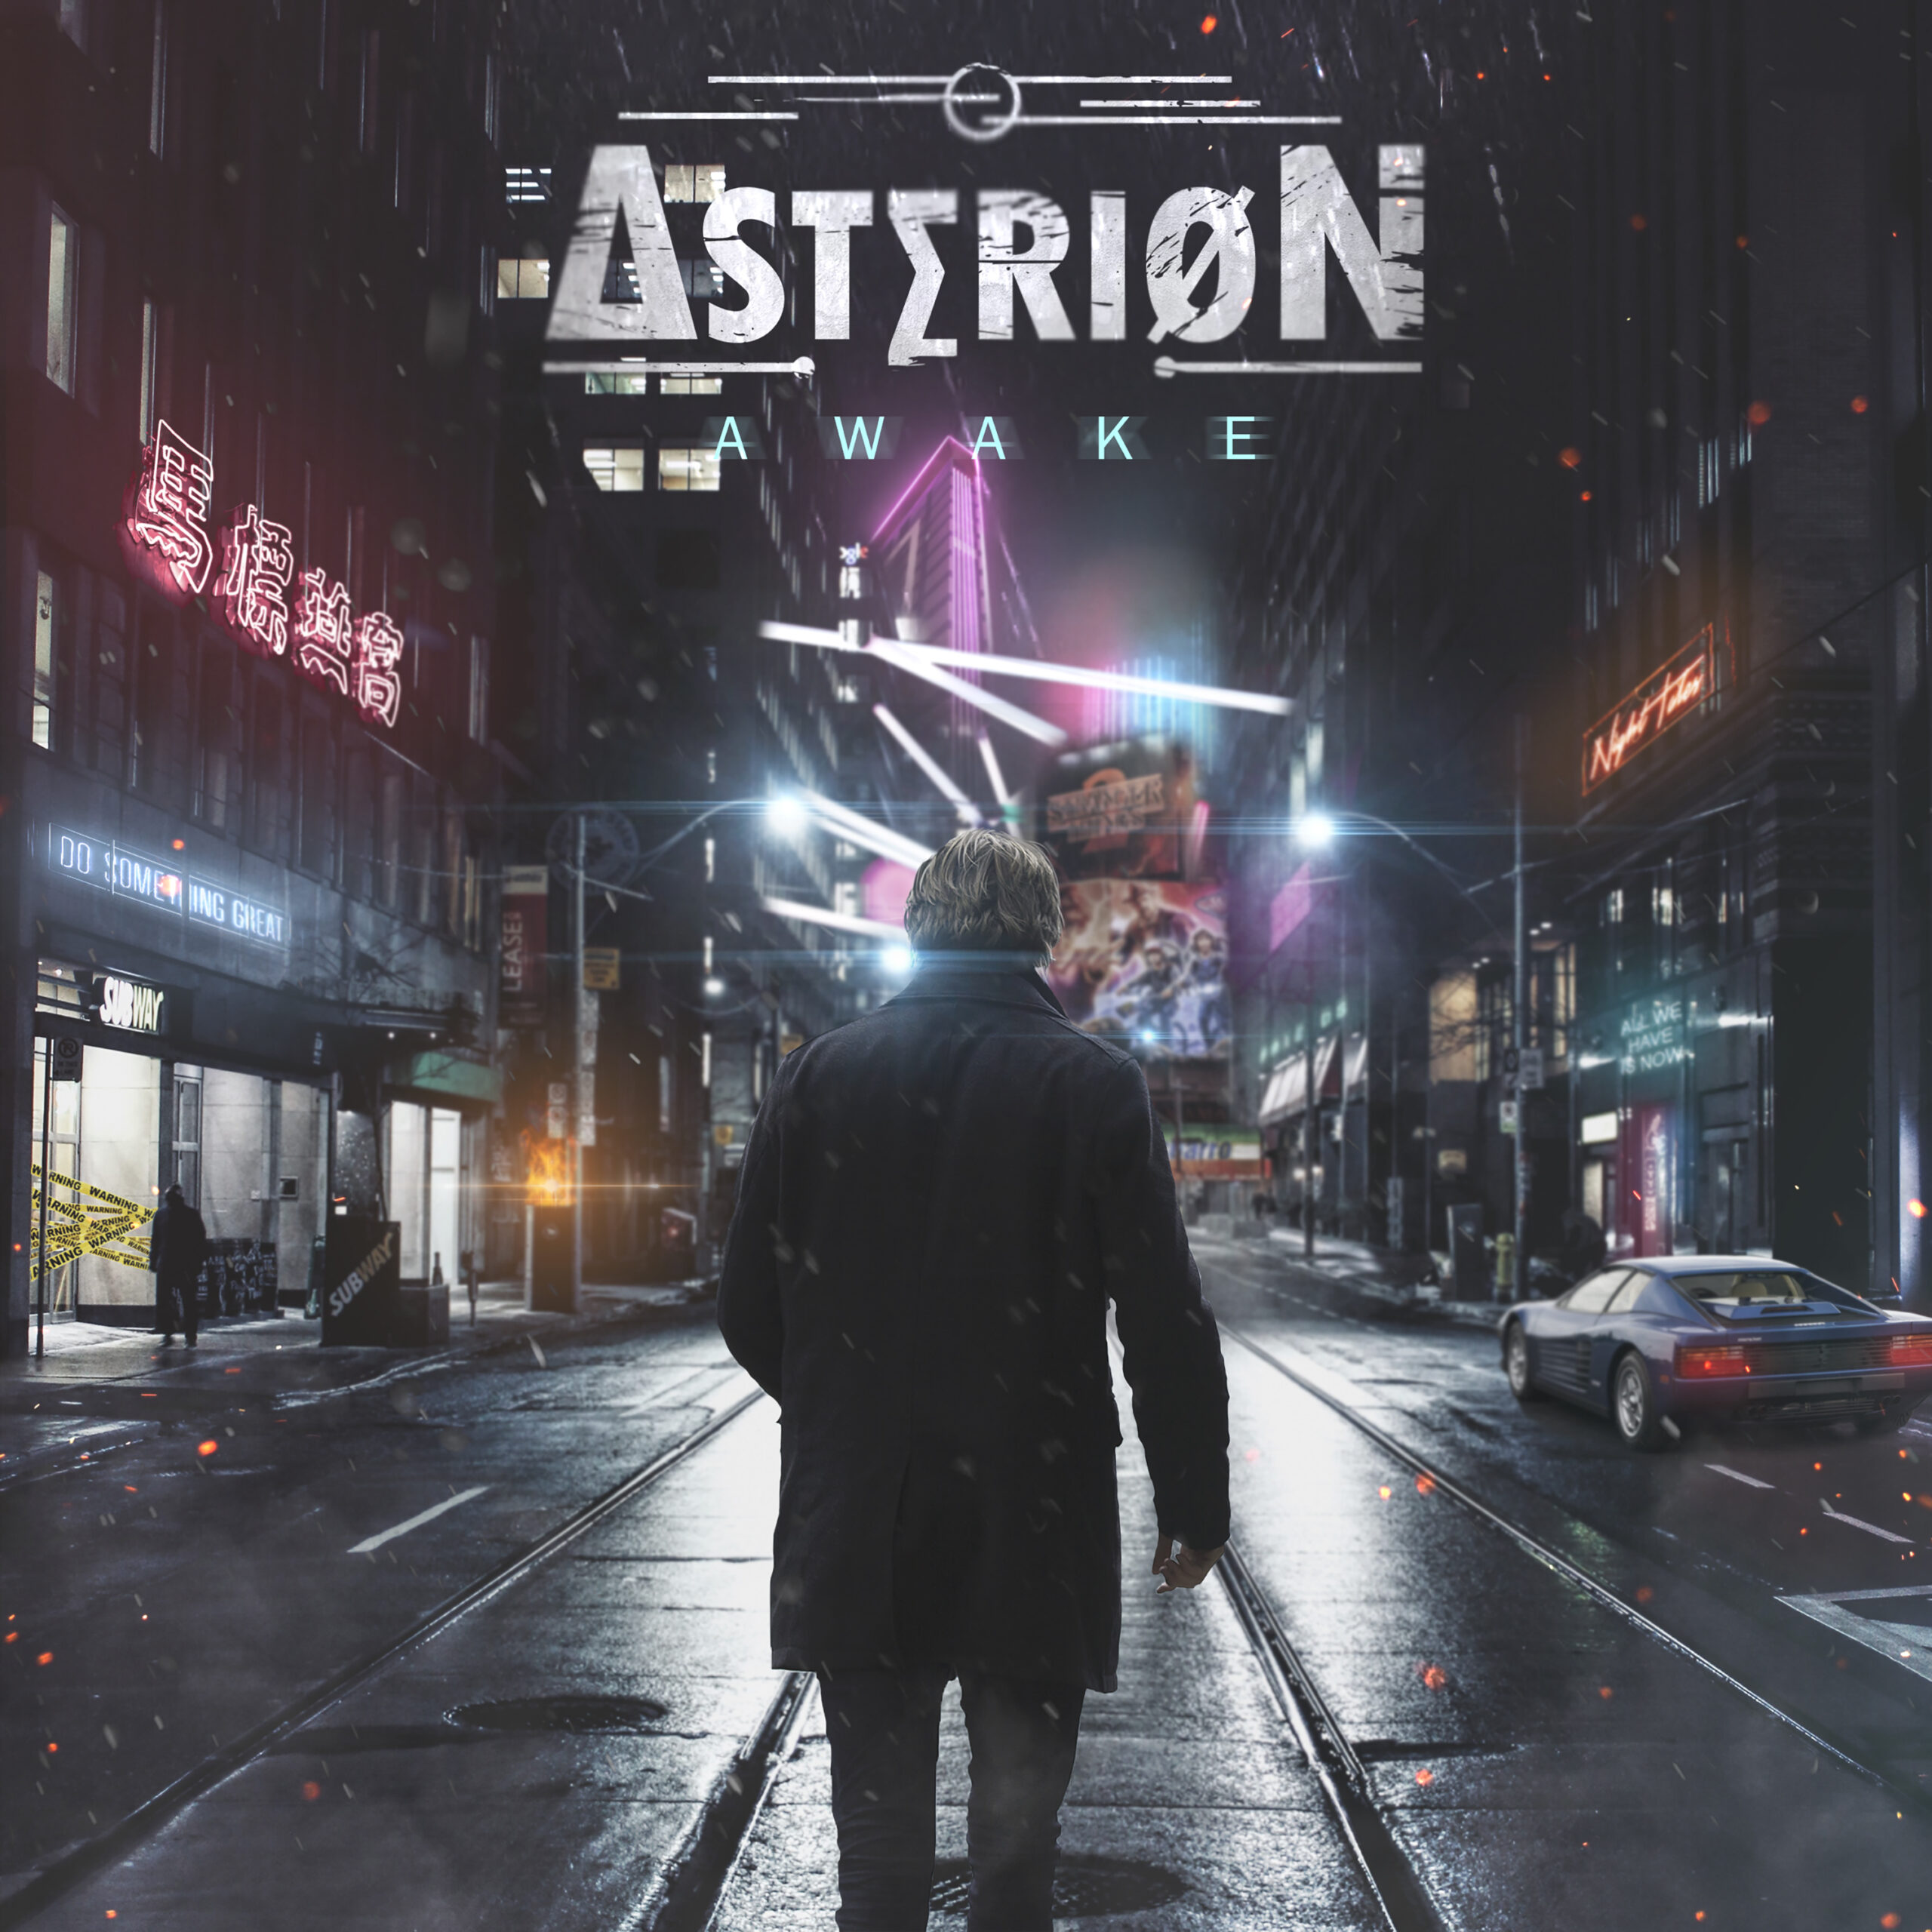 Asterion album cover by Gary Dranow